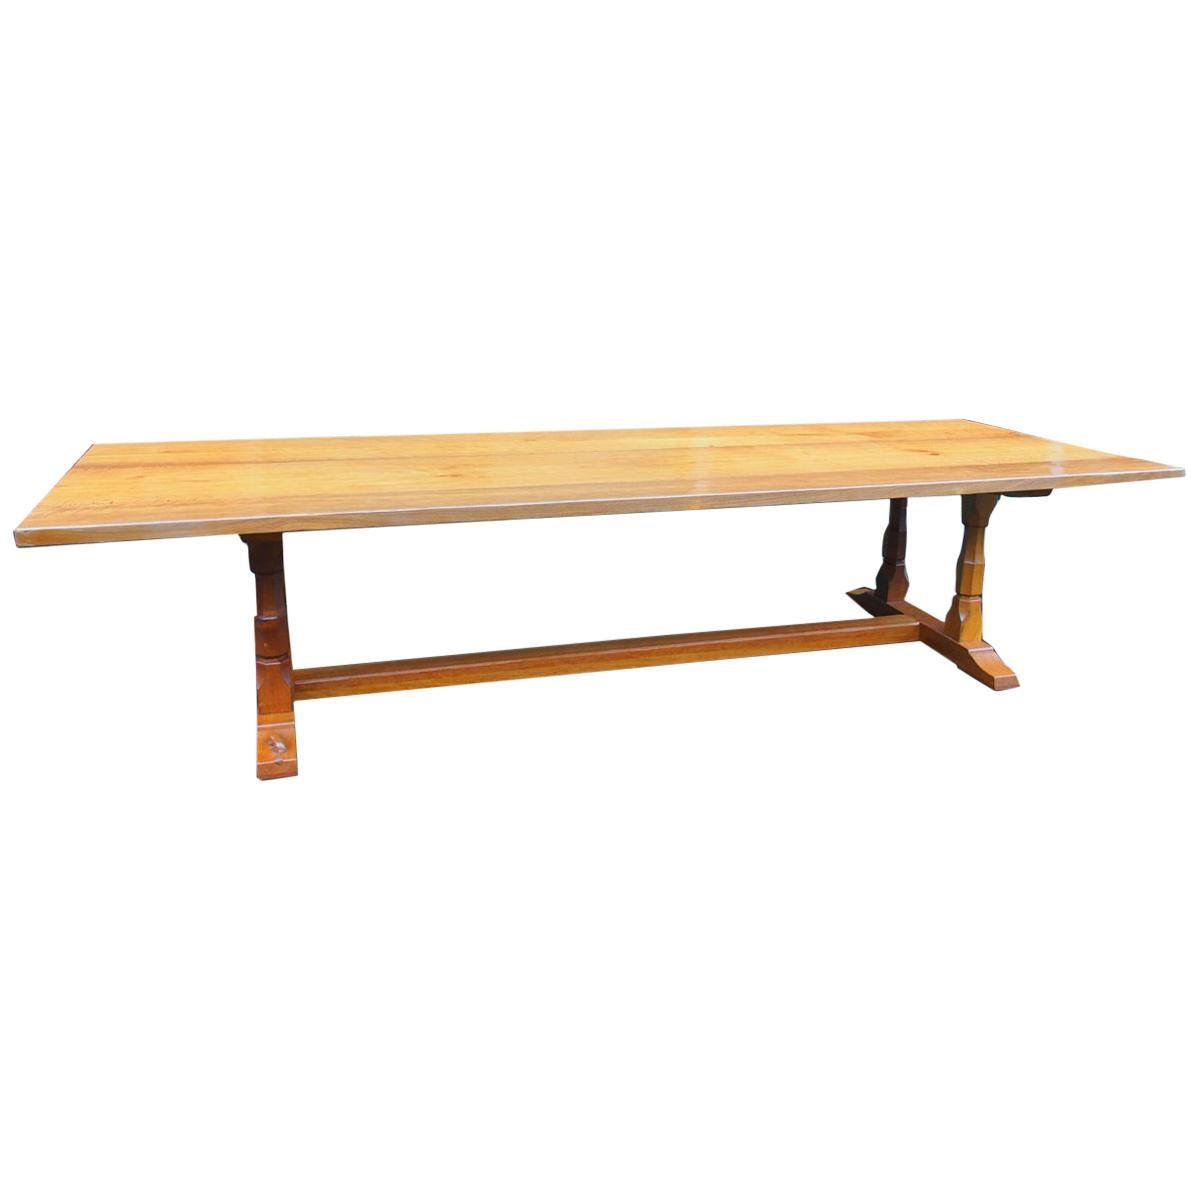 Handmade Oak Dining Table or Boardroom Table by Beaverman For Sale